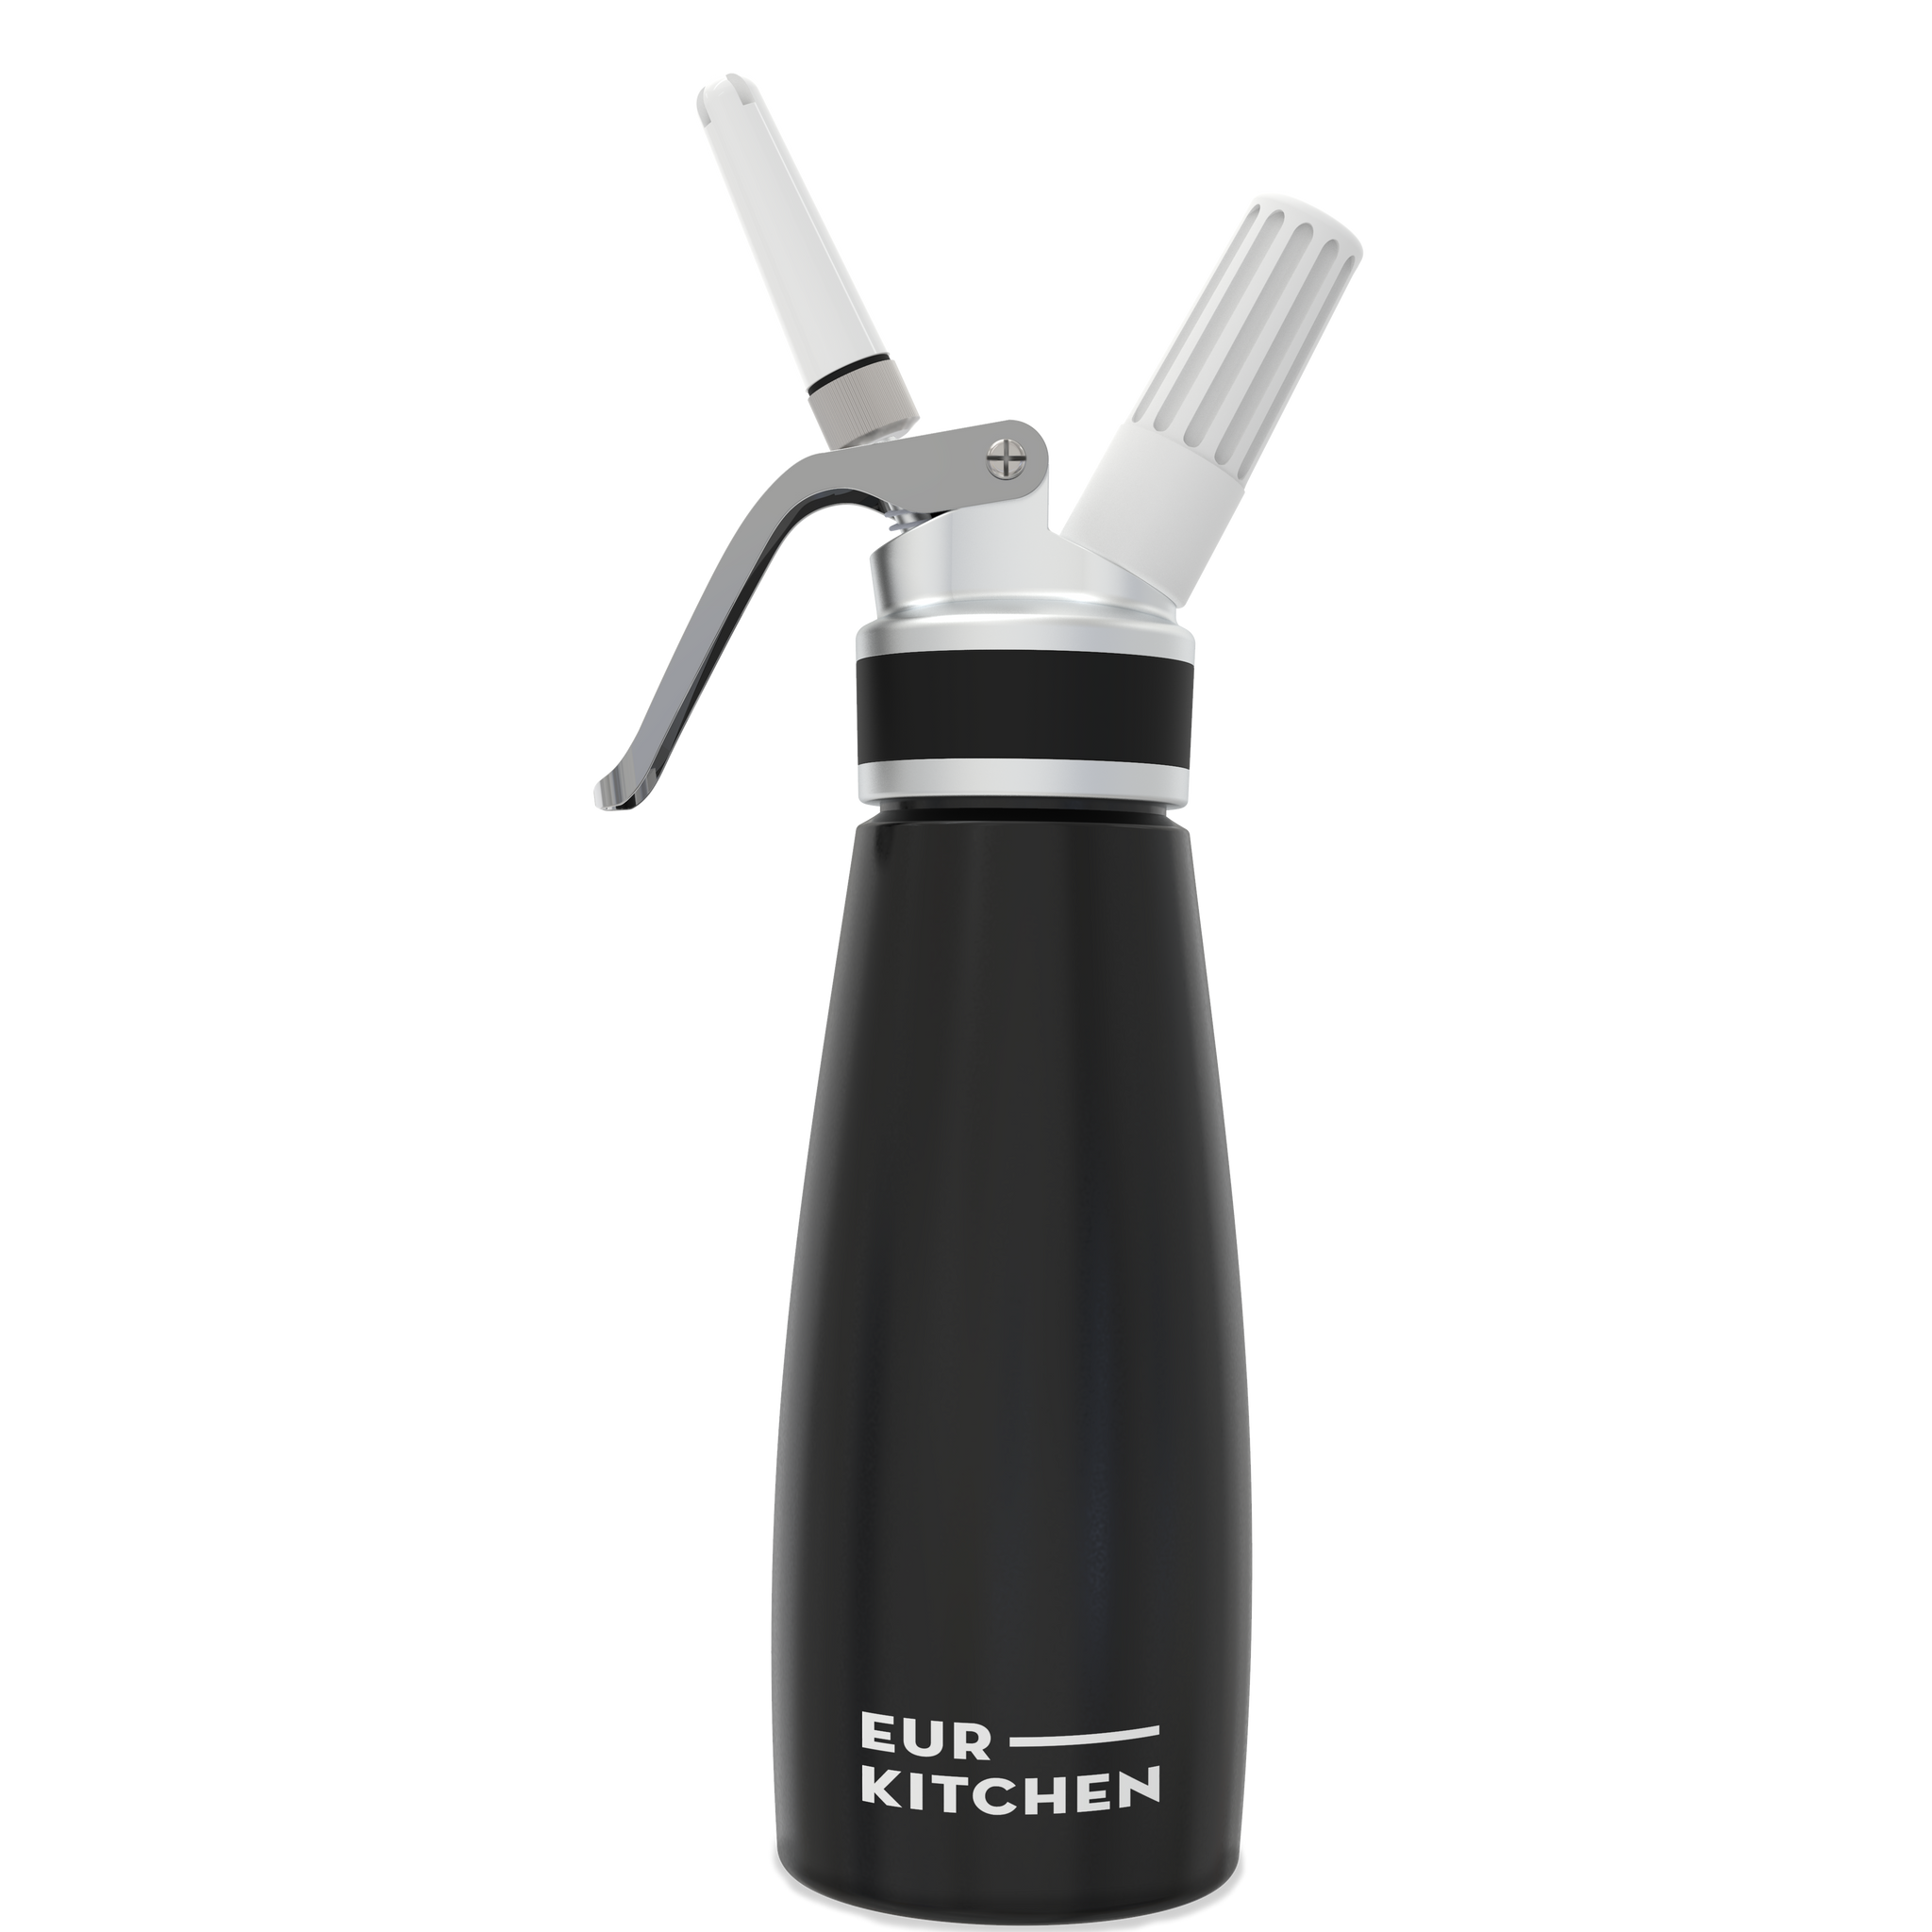 Nuvantee Cream Whipper (1-Pint) - Professional Aluminum Whipped Cream  Dispenser with 3 Decorating Nozzles - Uses Standard N20 Cartridges (not